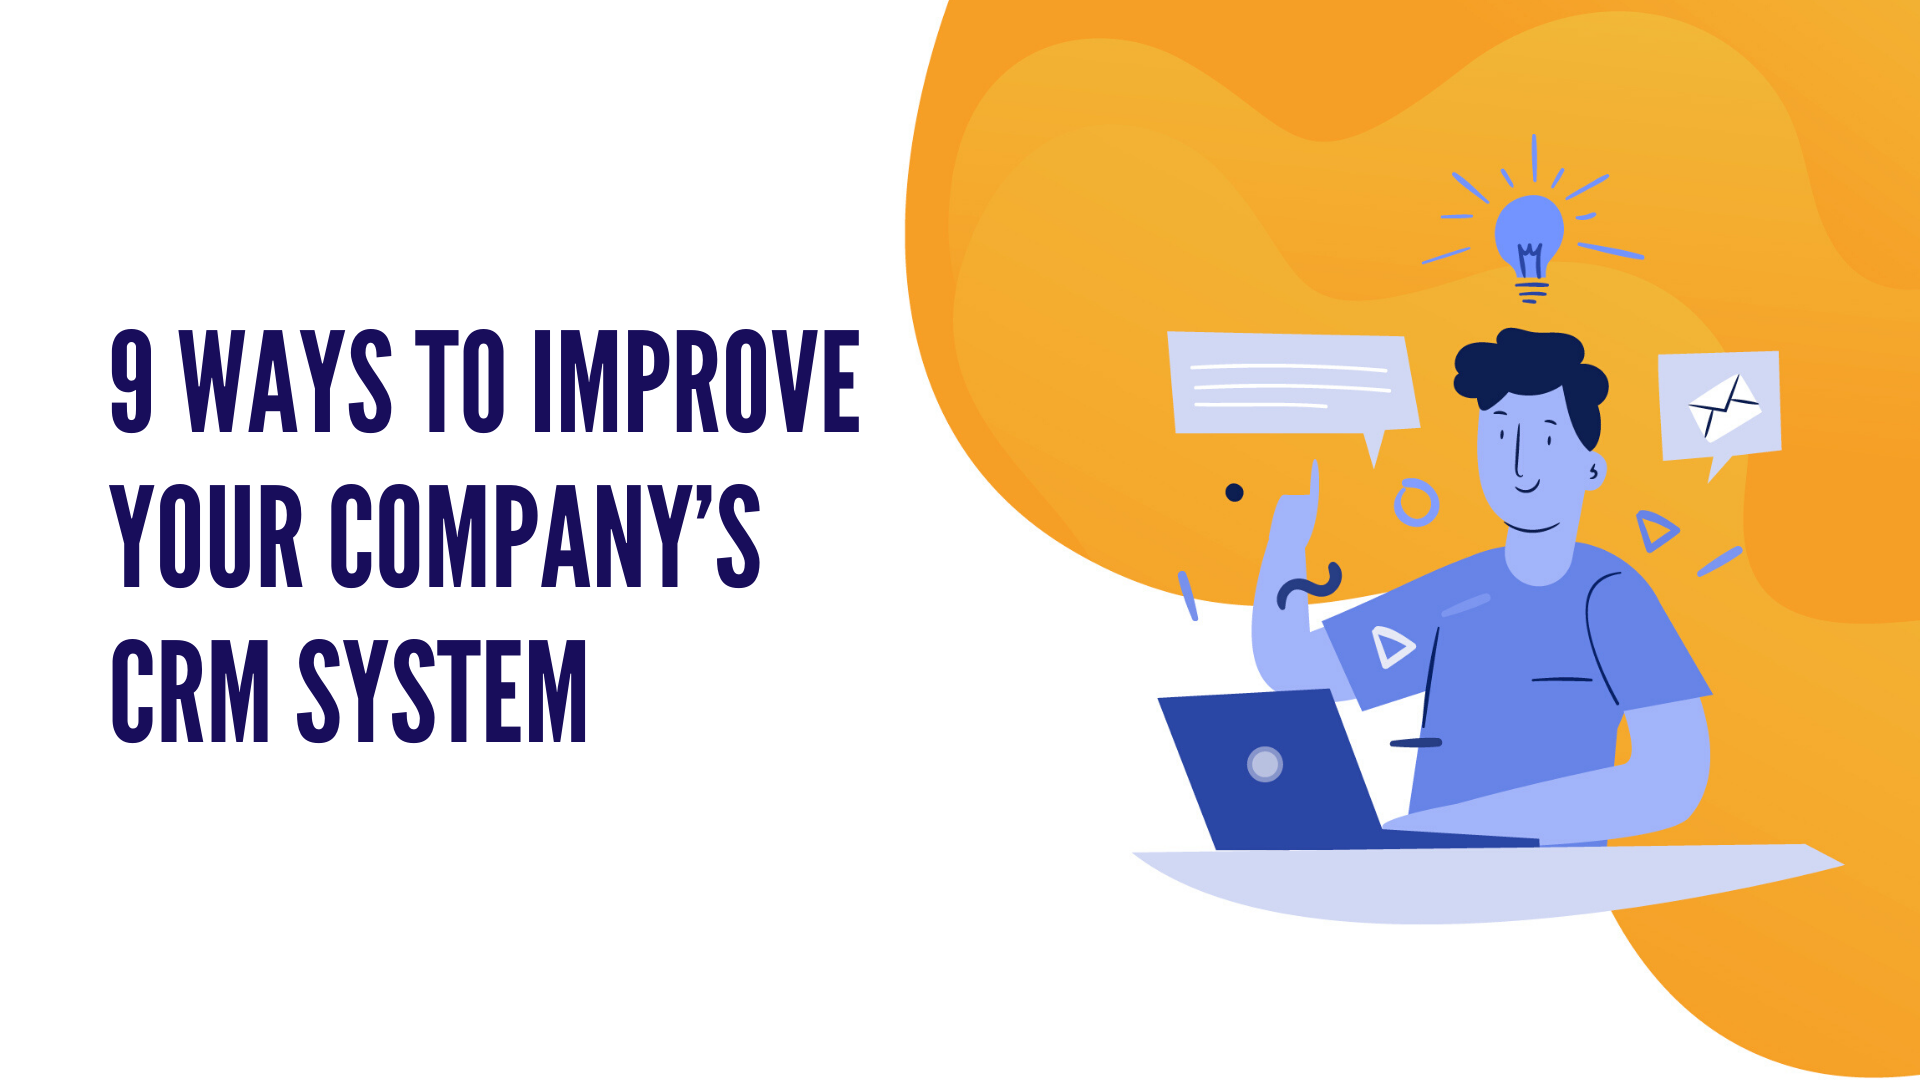 9 Ways to Improve Your Company’s CRM System